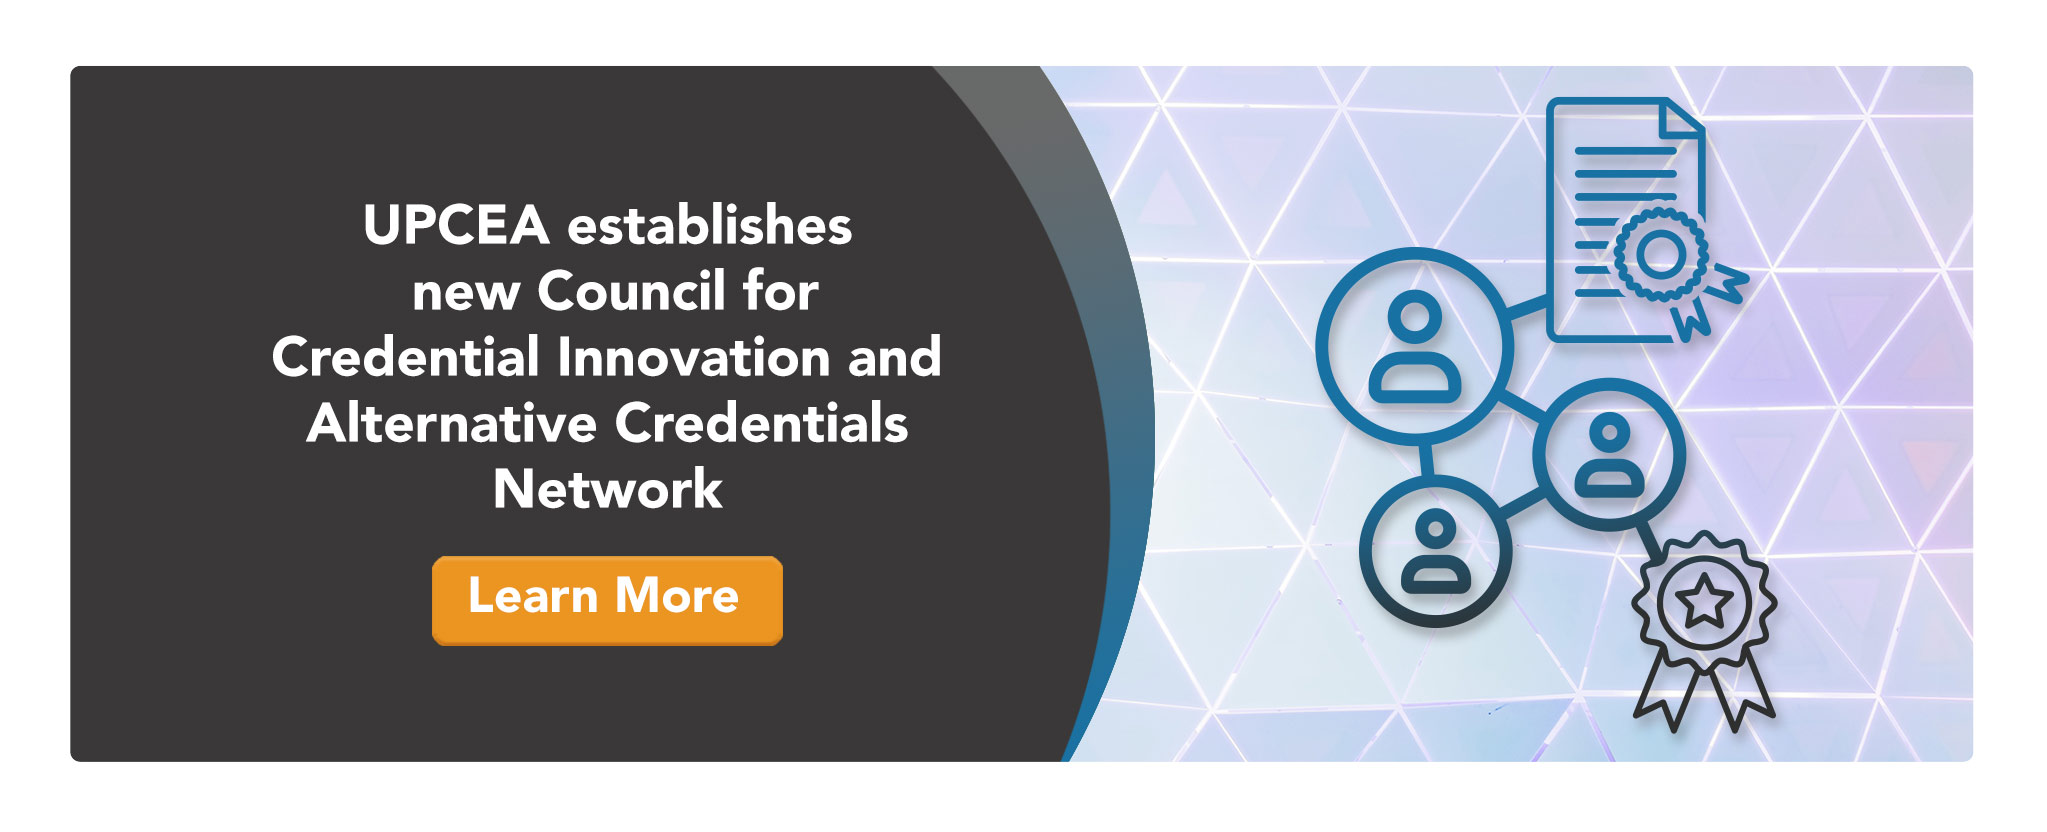 UPCEA Establishes Hub for Credential Innovation with New Council for Credential Innovation and Alternative Credentials Network